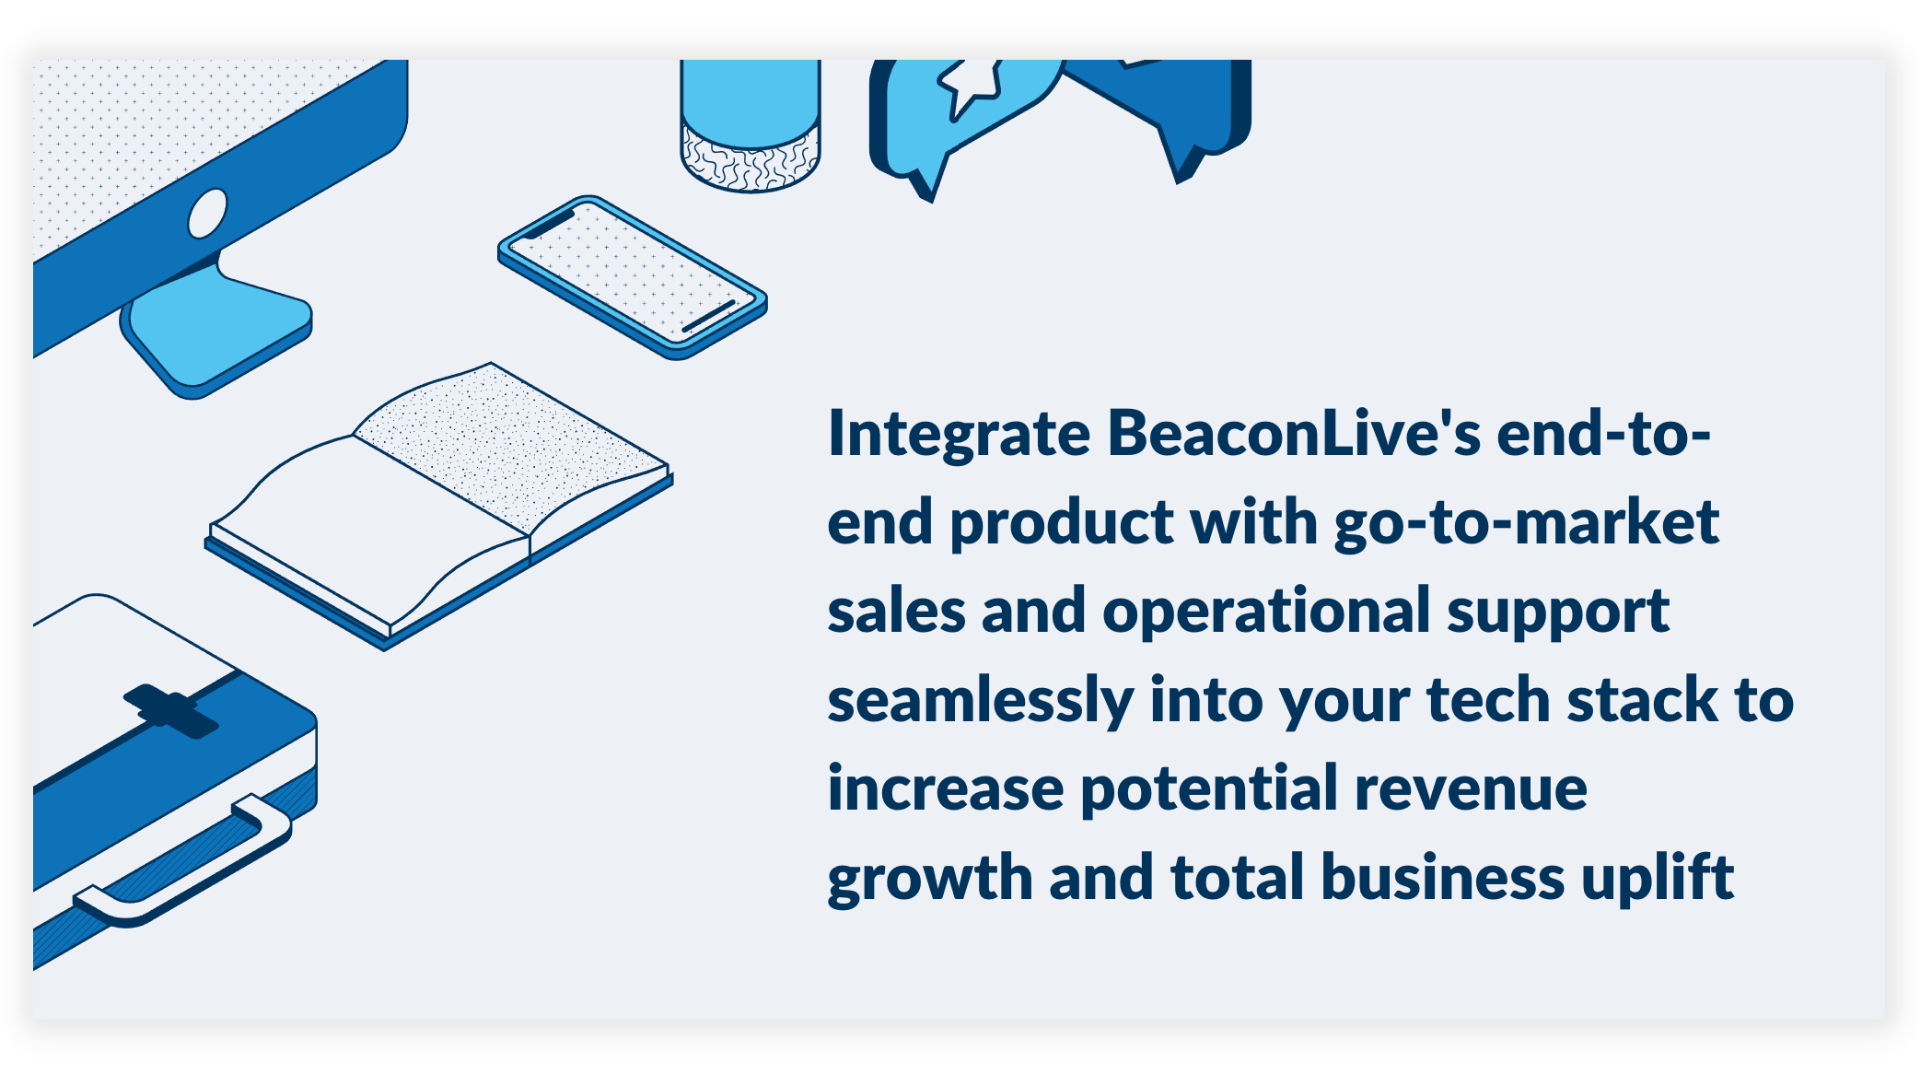 Integrate BeaconLive's end-to-end product with go-to-market sales and operational support seamlessly into your tech stack to increase potential revenue growth and total business uplift